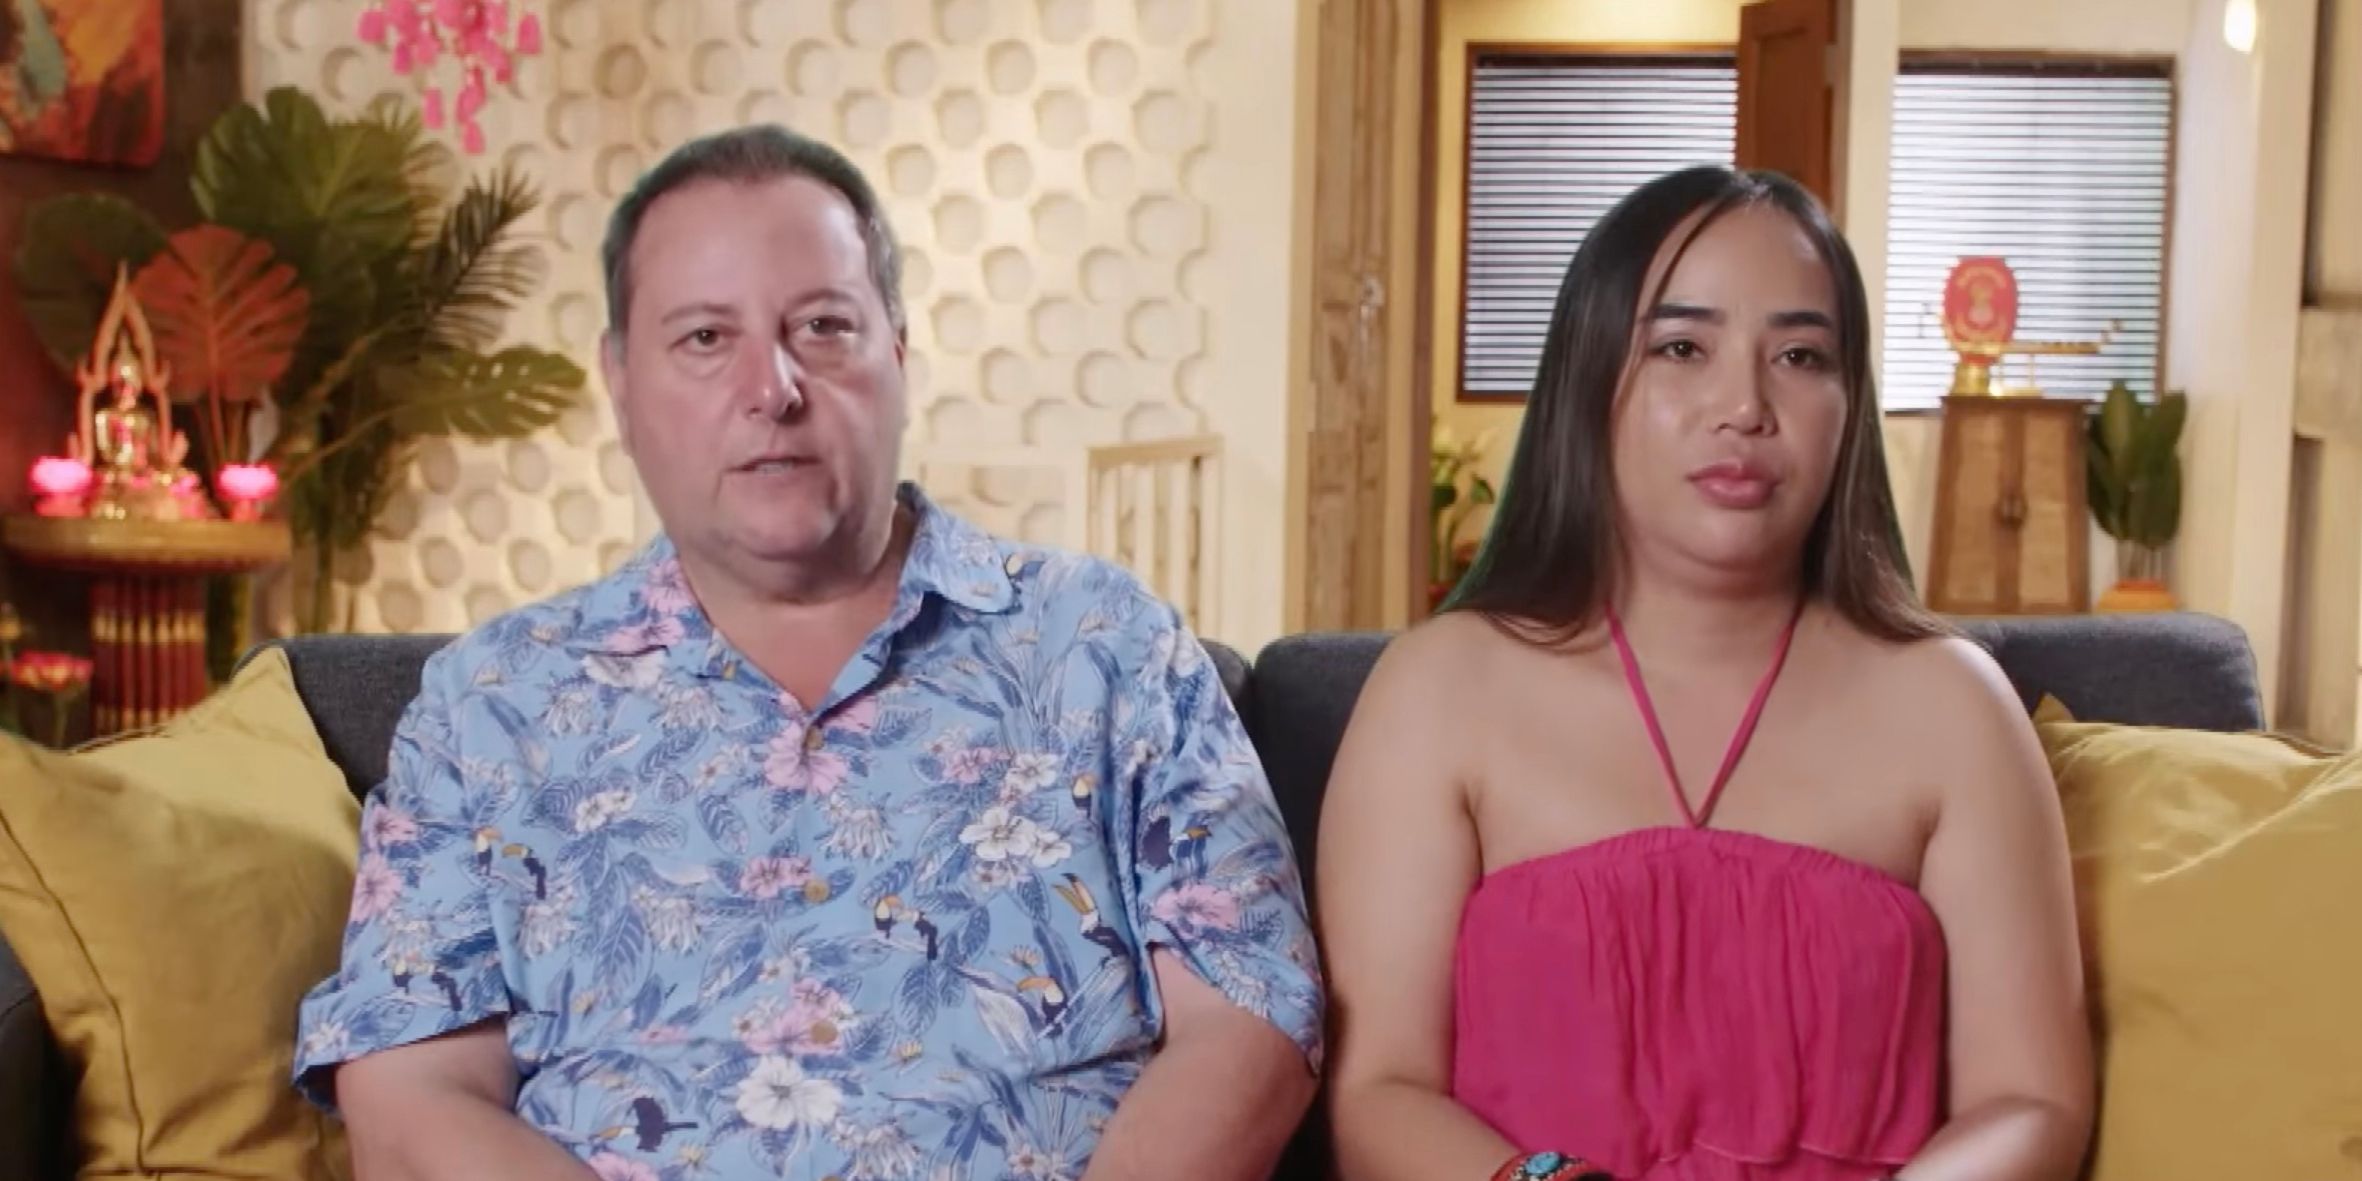 David & Annie Toborowsky from 90 Day Fiance cast members on couch with serious expressions